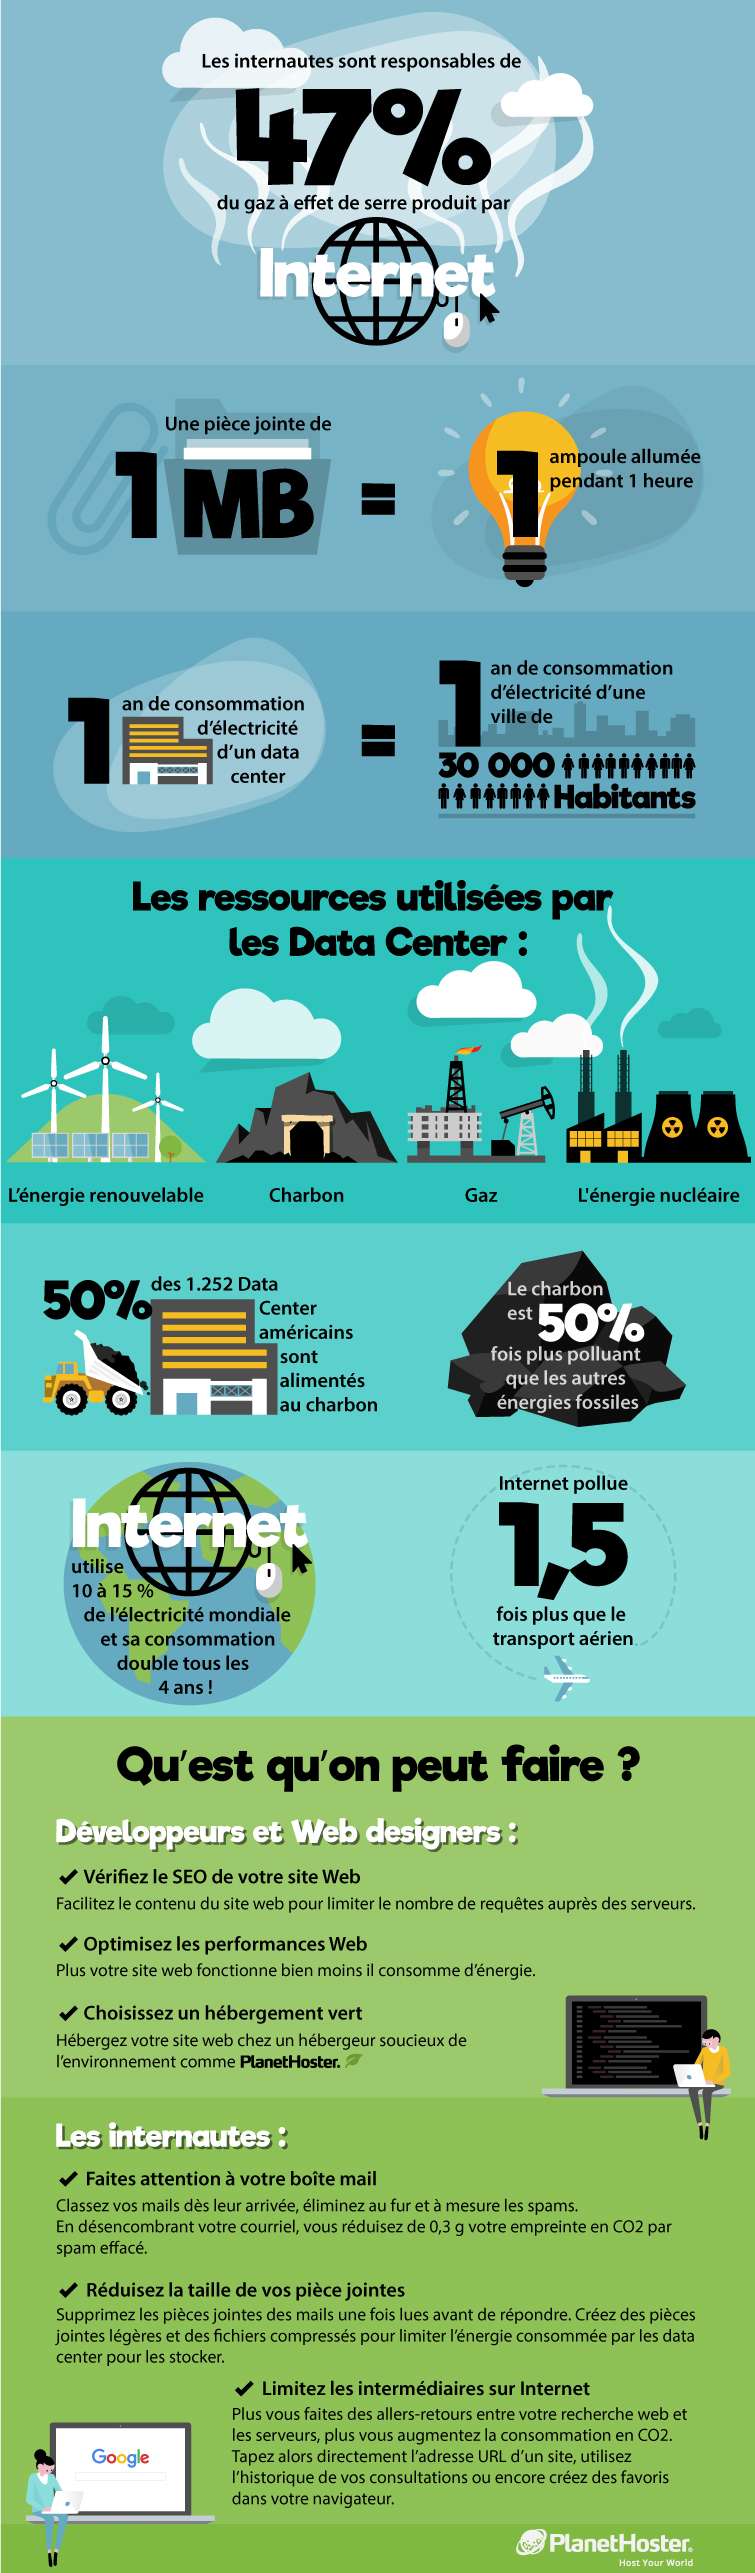 Infographie webpollution